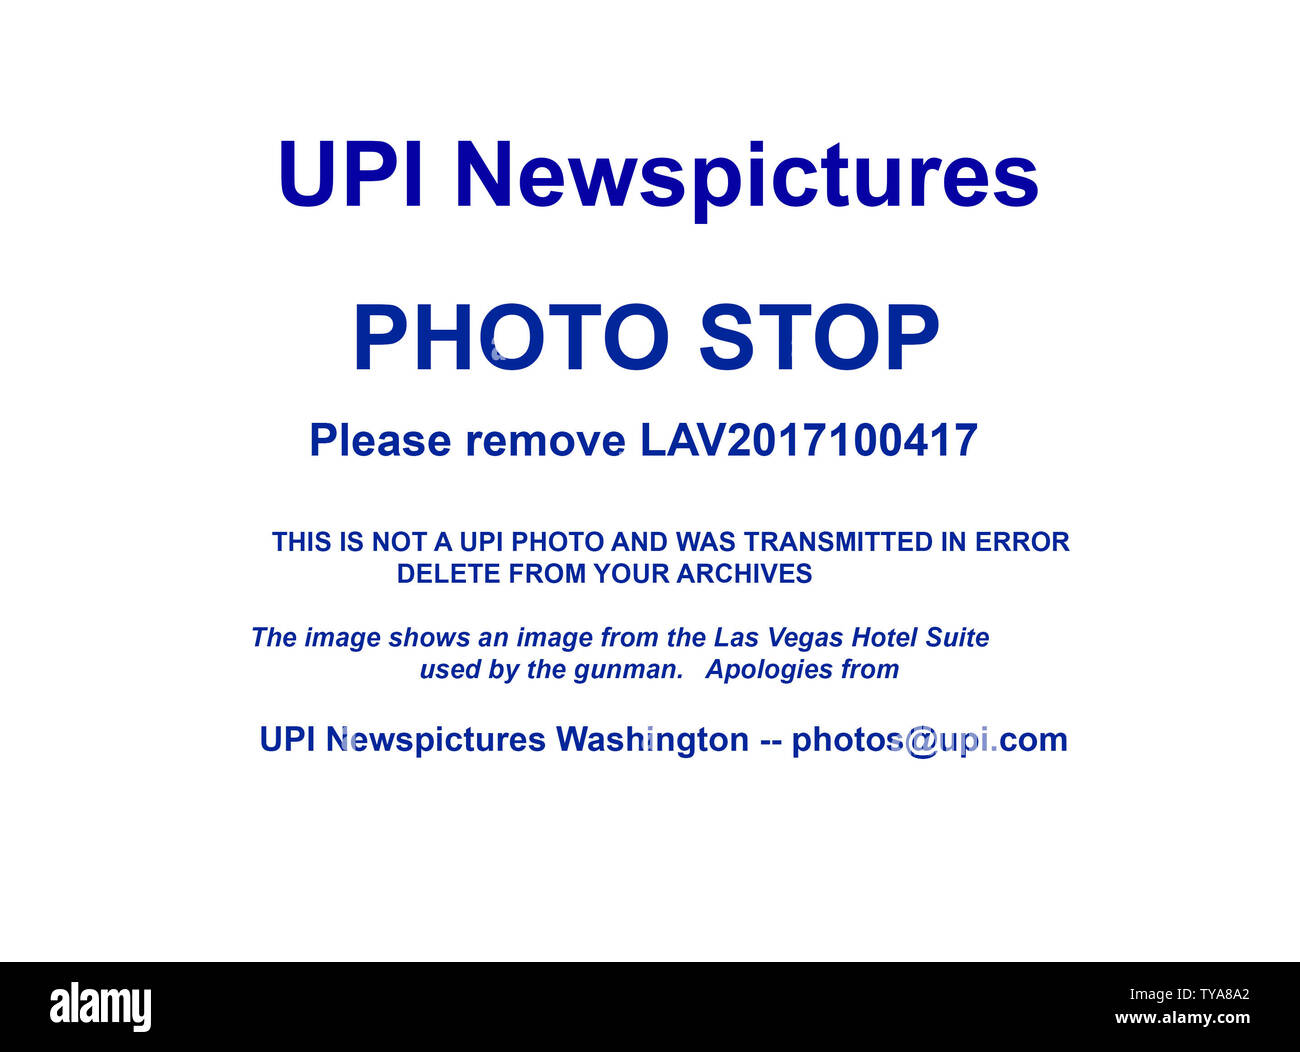 Please remove photo LAV2017100417 from your archives that was transmitted from Las Vegas at approximately 815pm USA Eastern Time on October 4, 2017 (1215 GMT Oct 5th).   This is not a UPI photo and must be removed from your archives.  It shows the crime scene at the Las Vegas hotel suite used by the gunman.  This is a mandatory photo stop, it must be removed from your archives and not be used.  UPI Newspictures apologies for this error.  Thank you,  UPI Washington  photos@upi.com  ptb Stock Photo